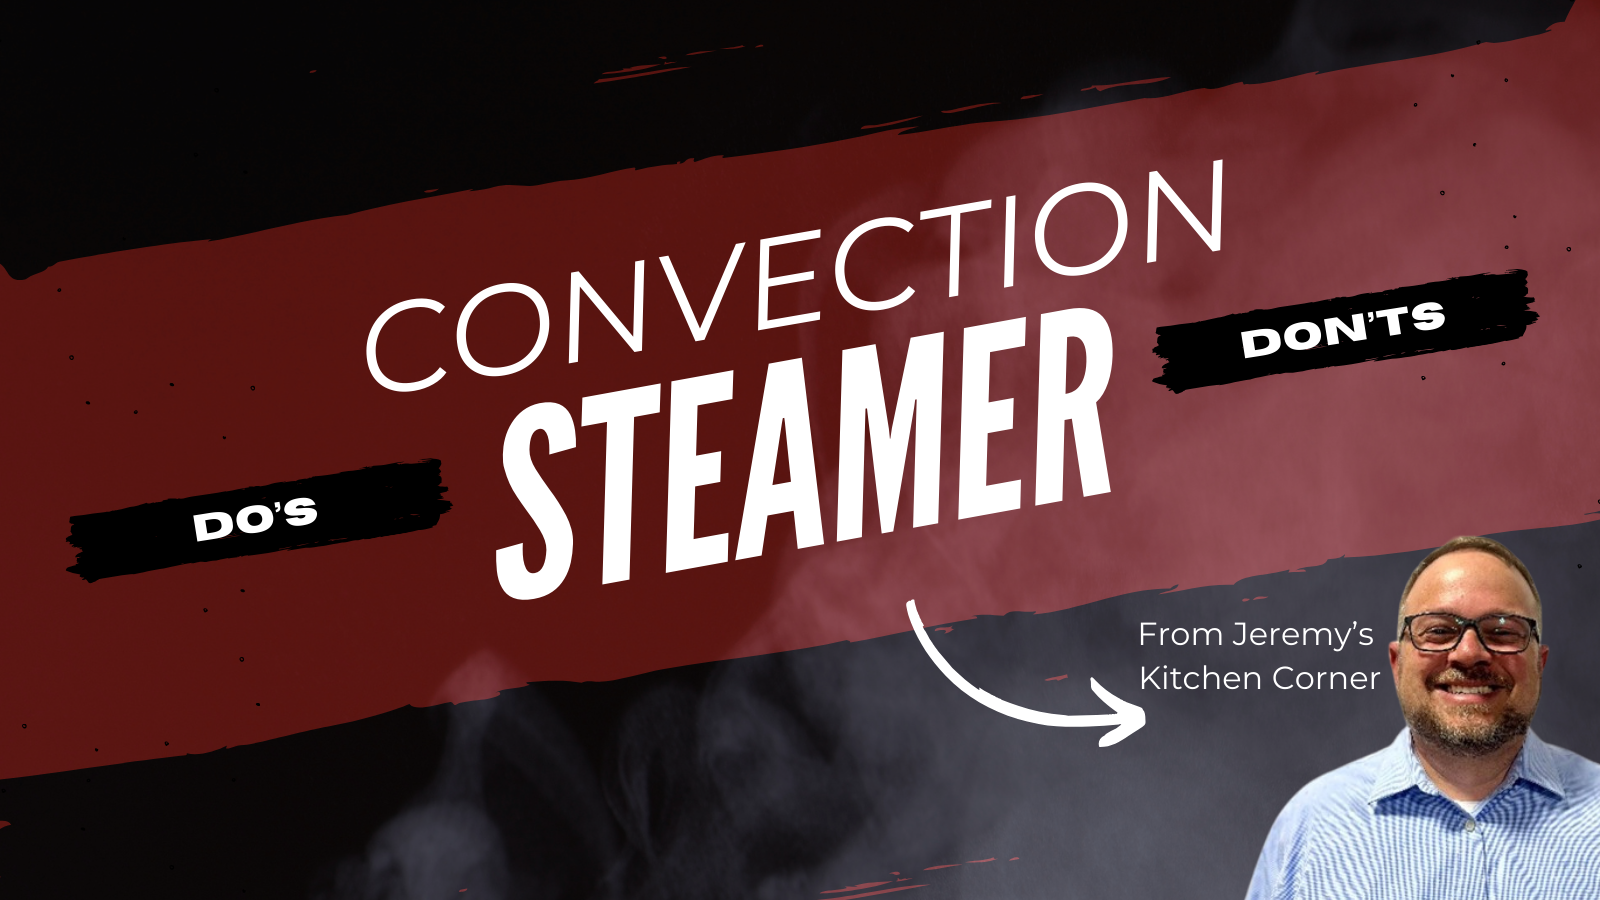 Convection Steamer Do's and Don'ts Guide Call To Action